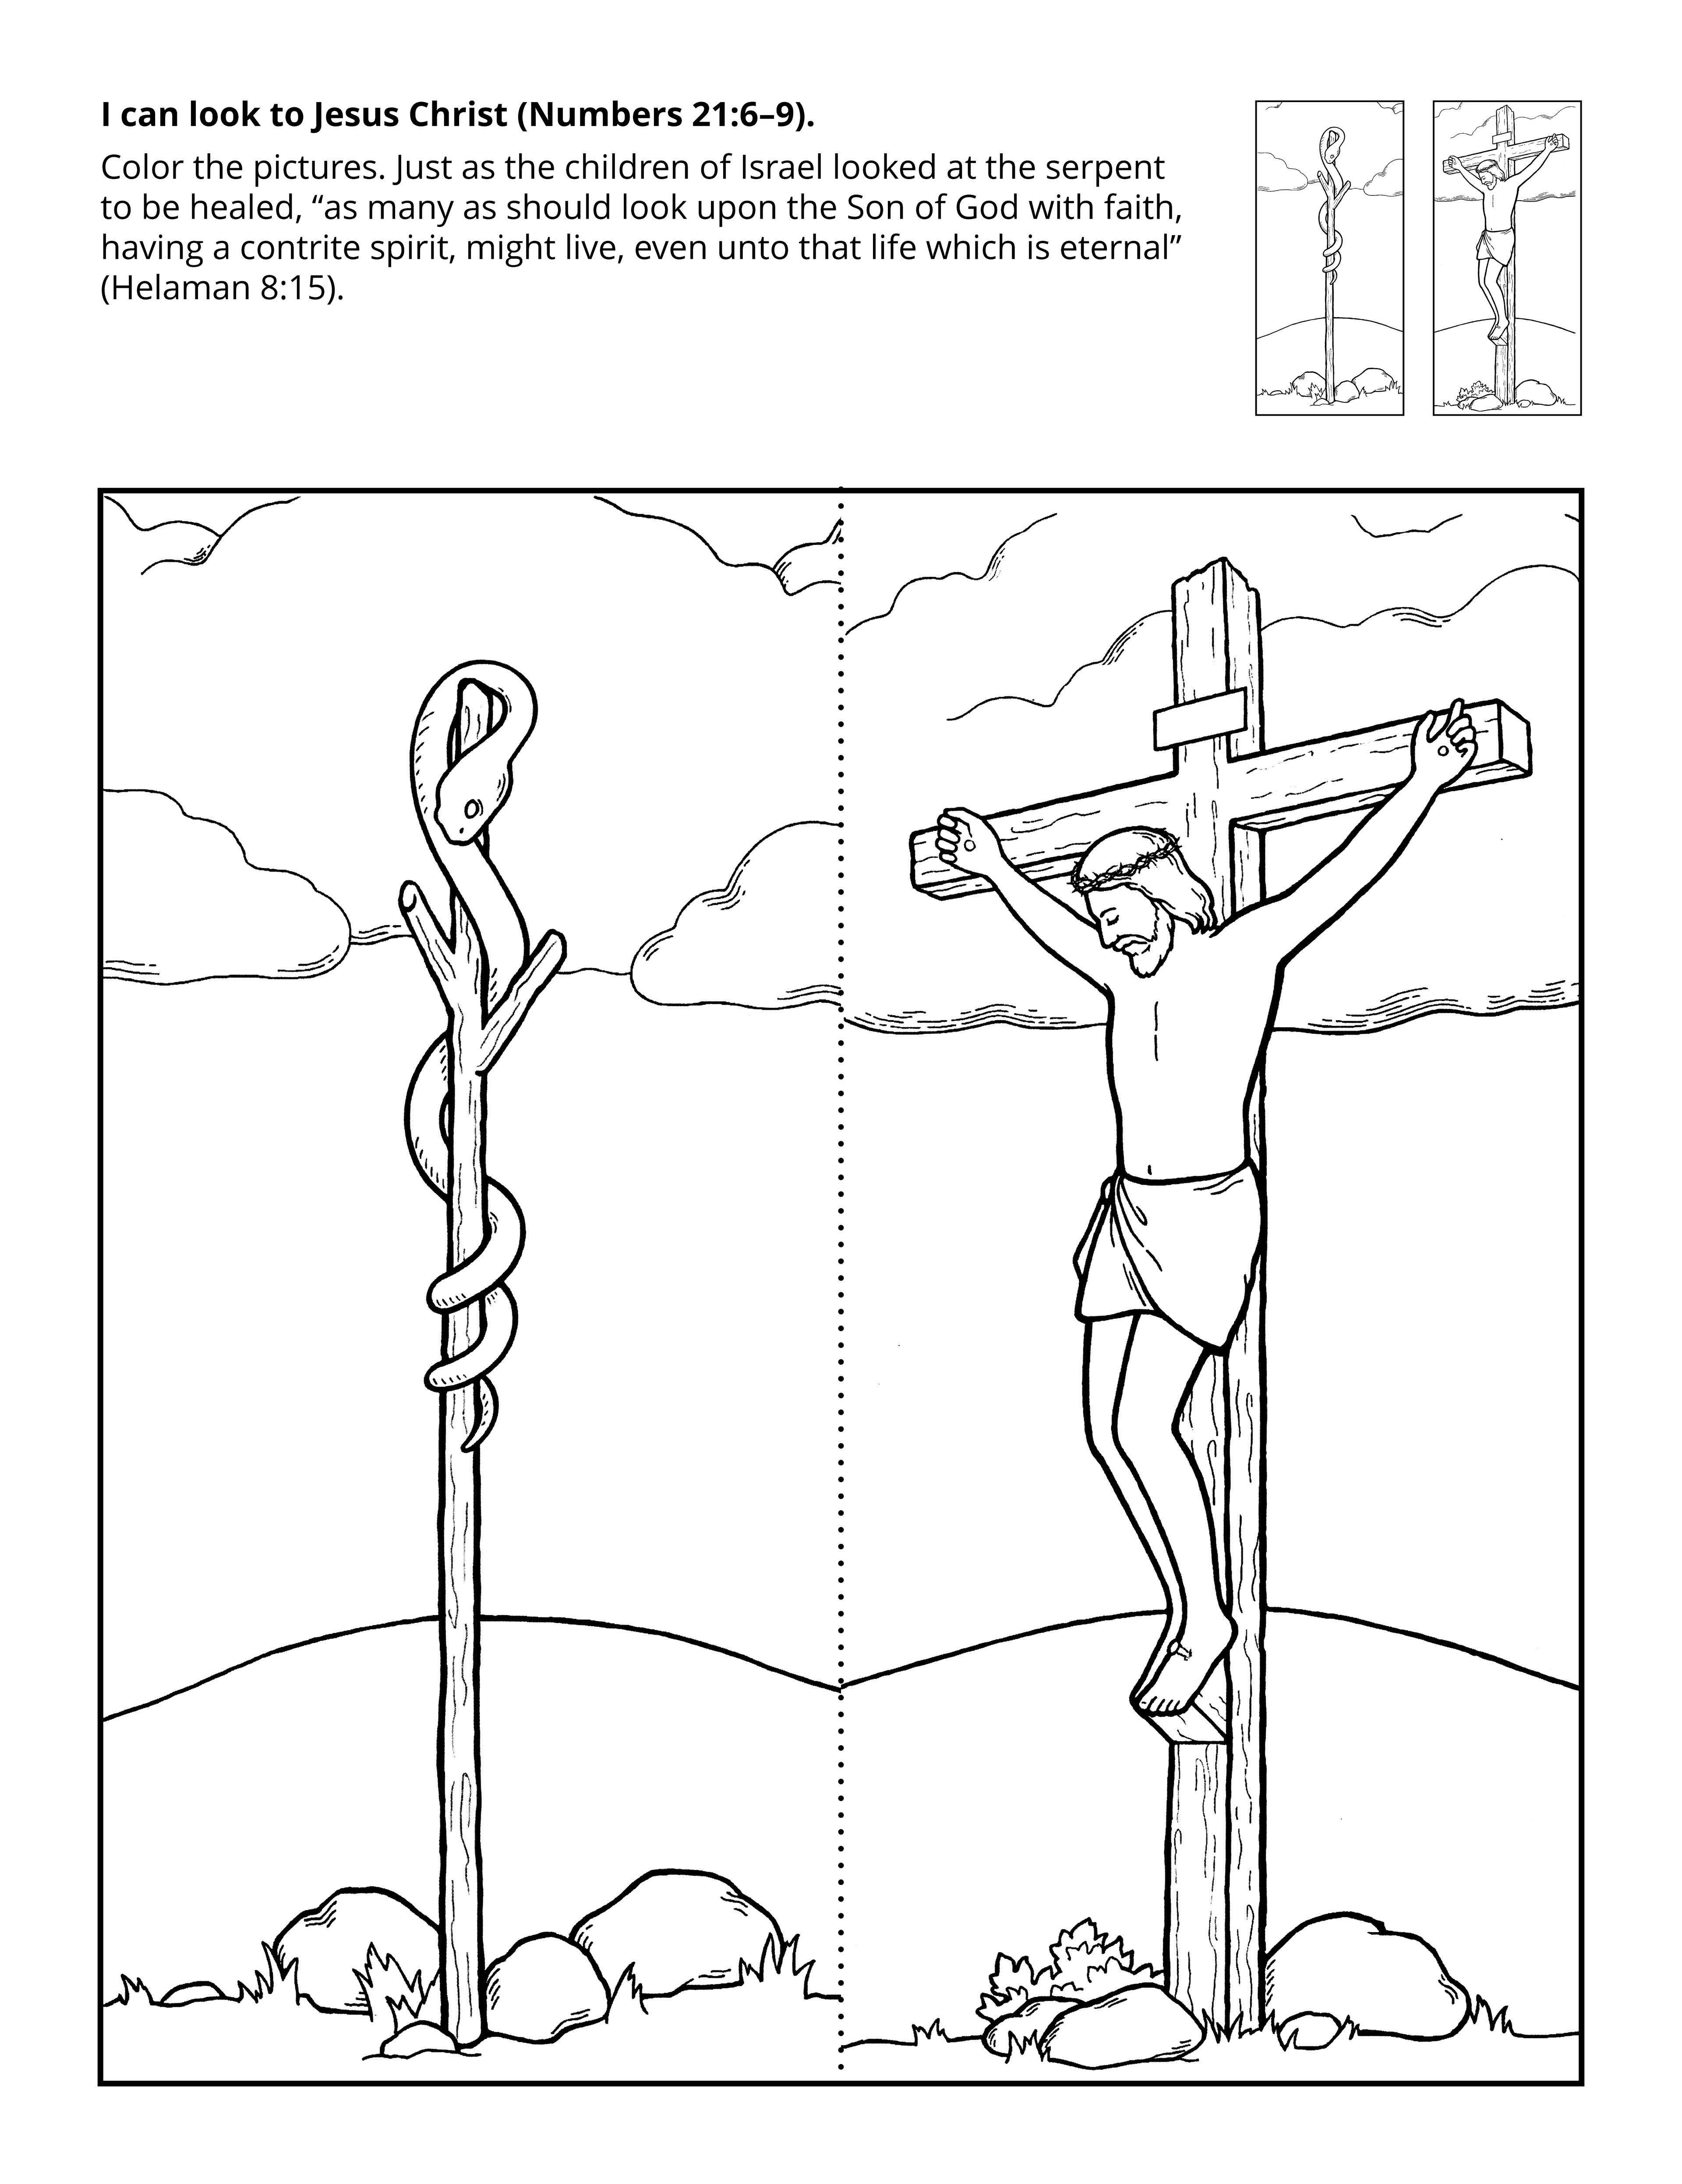 "I can look to Jesus Christ" activity page.